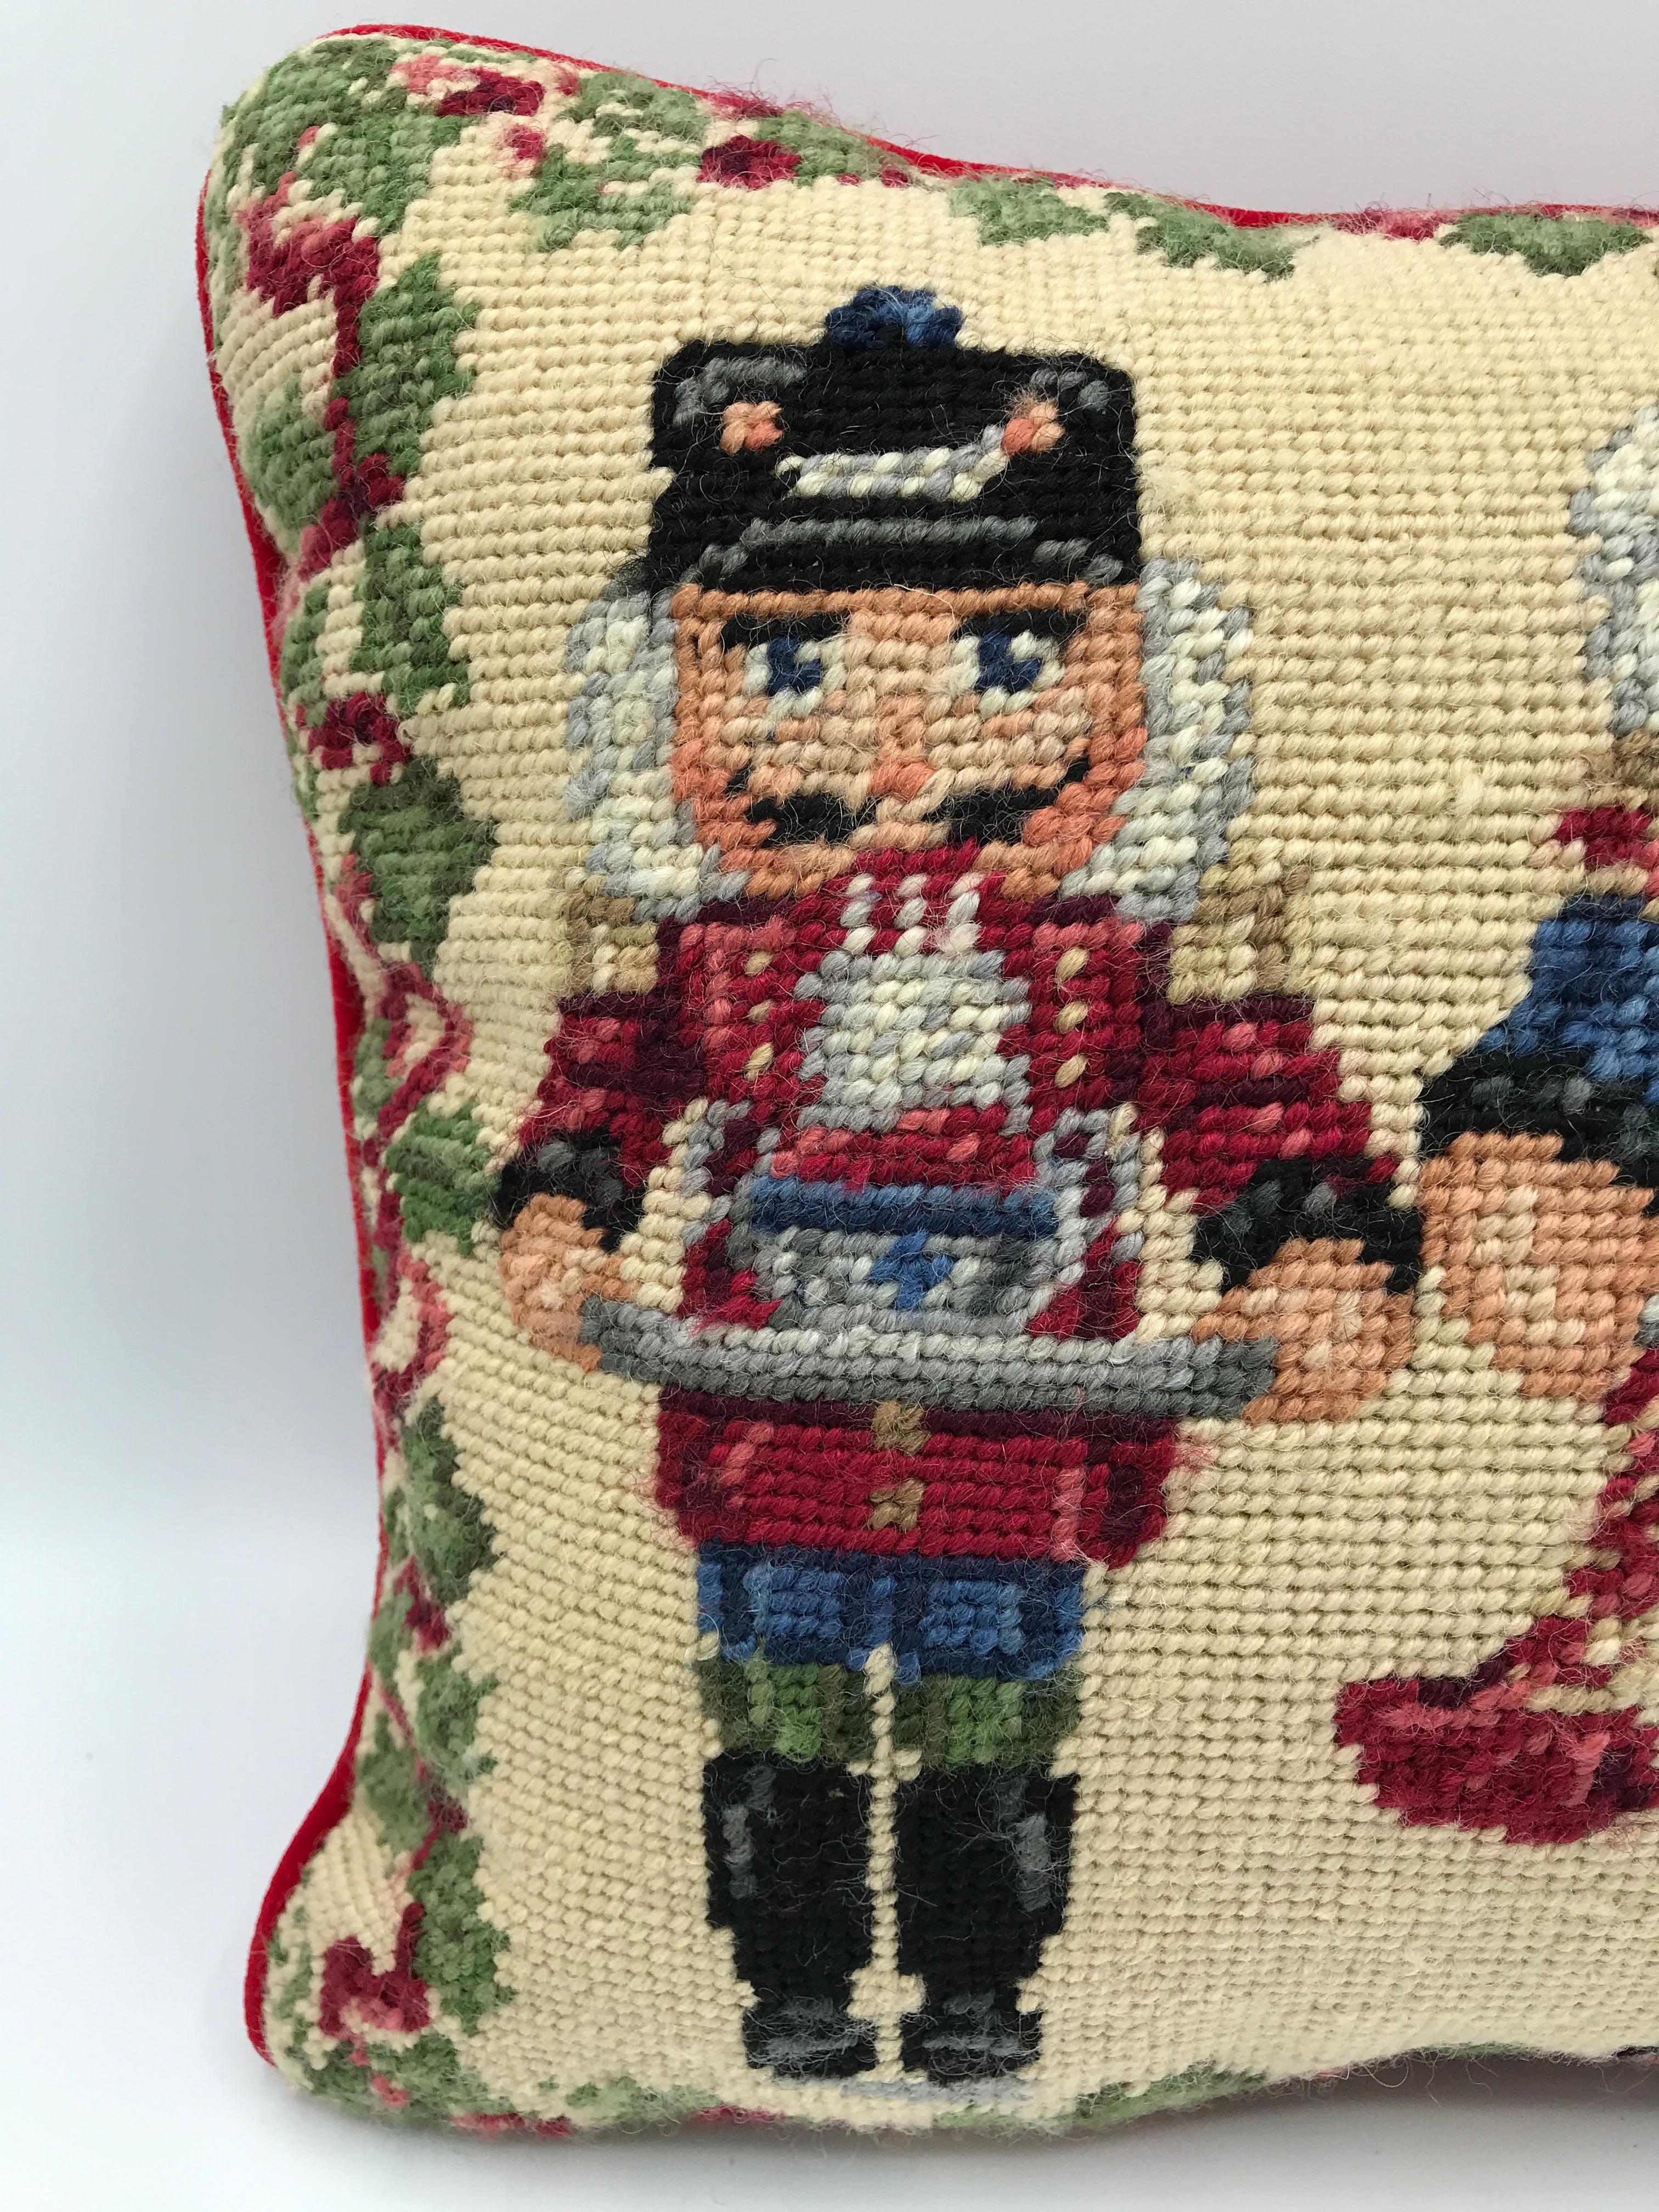 Listed is a festive and seasonal, 1970s wool needlepoint accent pillow. The piece features three nutcrackers on the frontside, with an ivy vine motif along the border. The backside and welt are red velvet, with a hidden zipper closure. Poly-blend